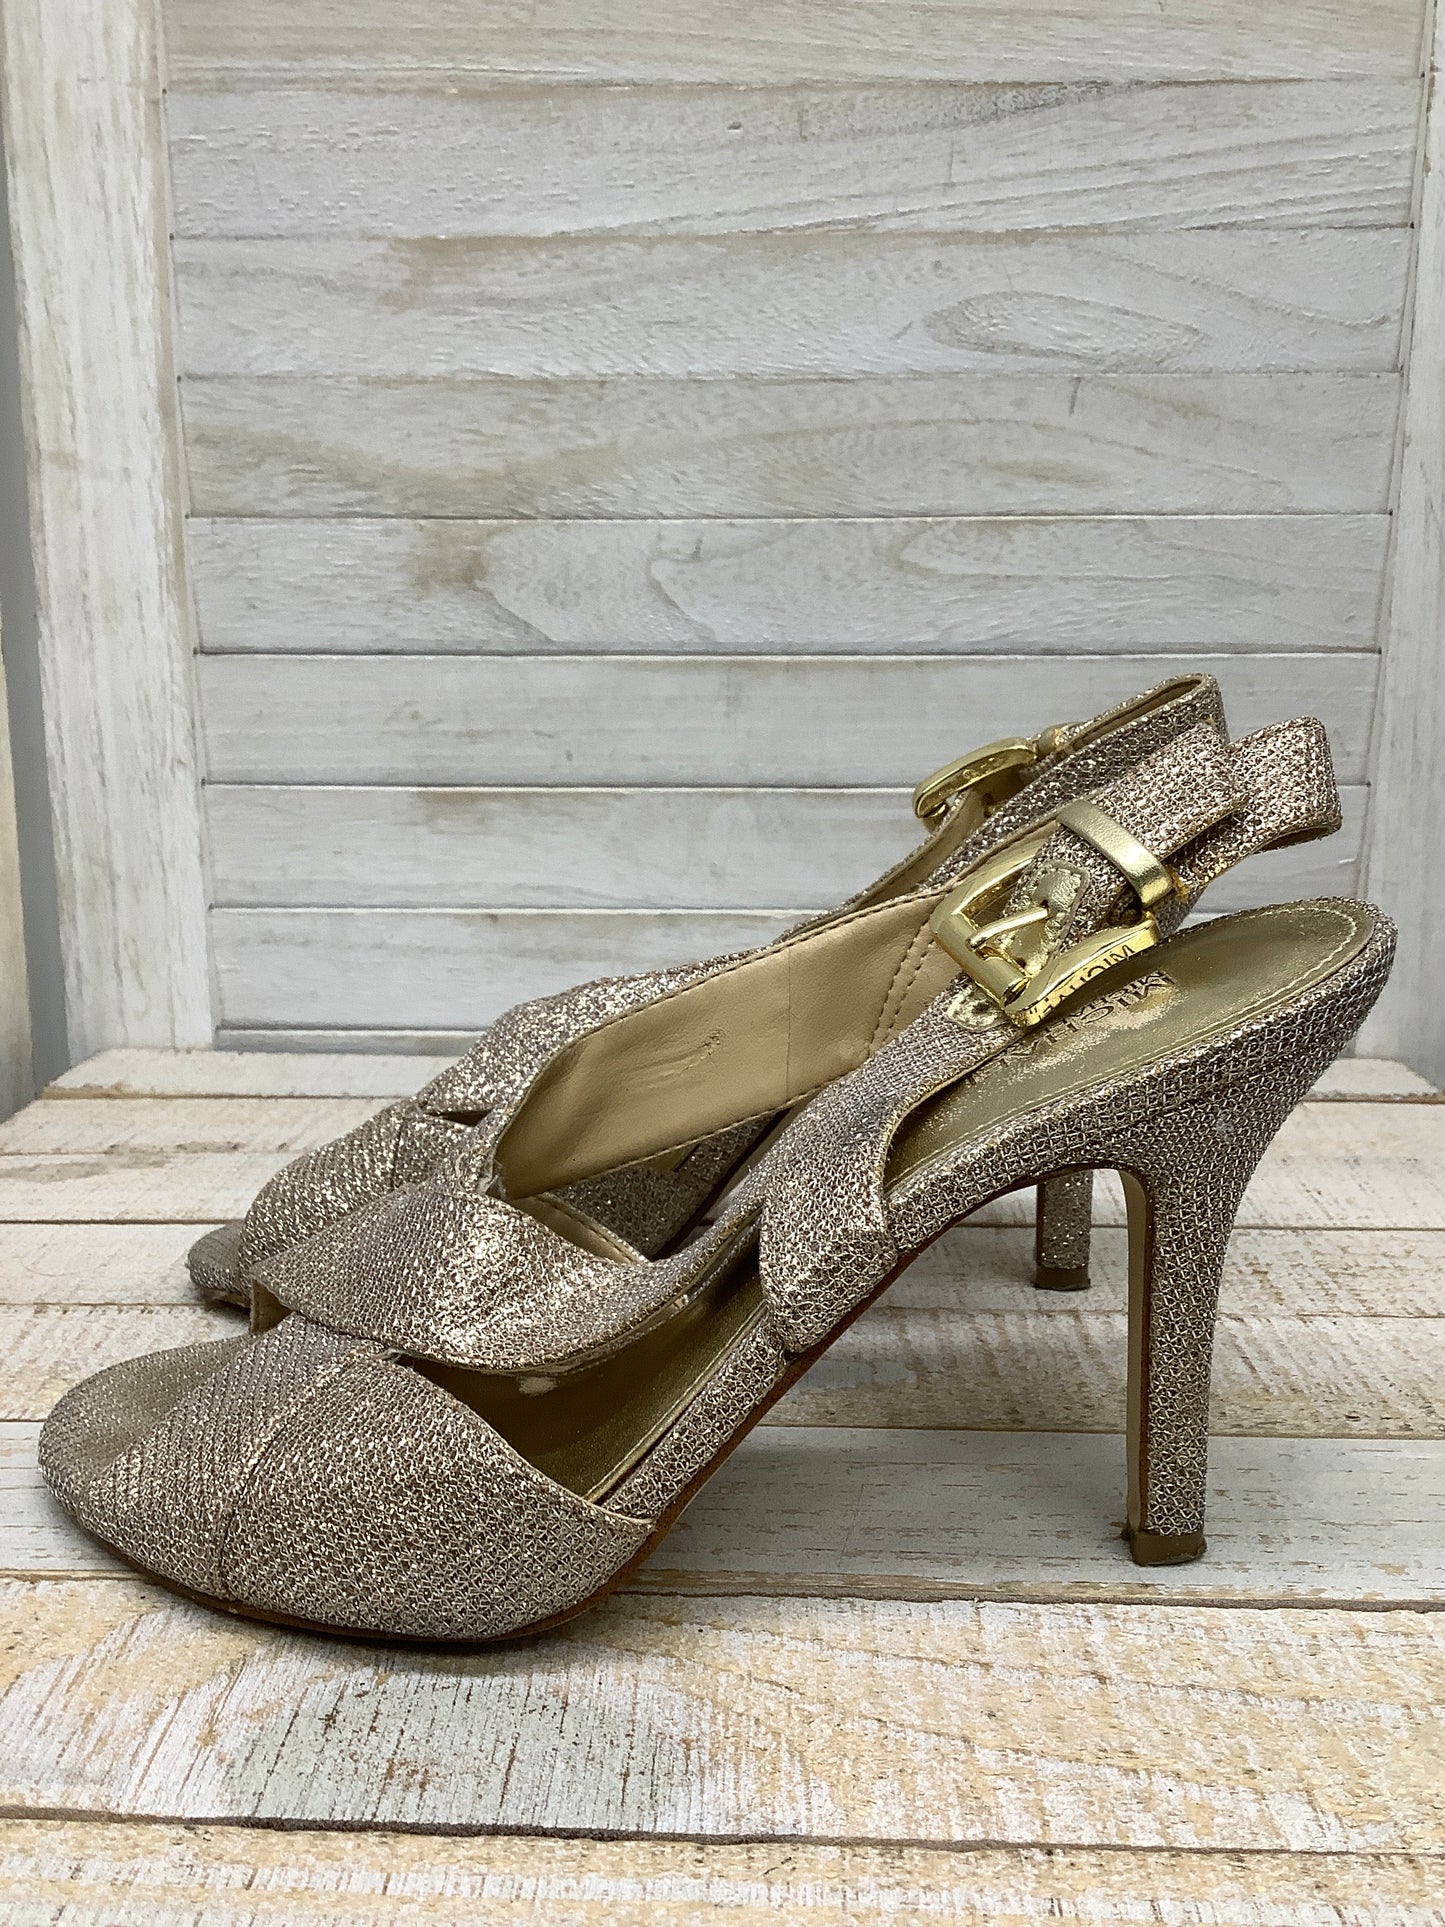 Sandals Heels Stiletto By Michael By Michael Kors  Size: 6